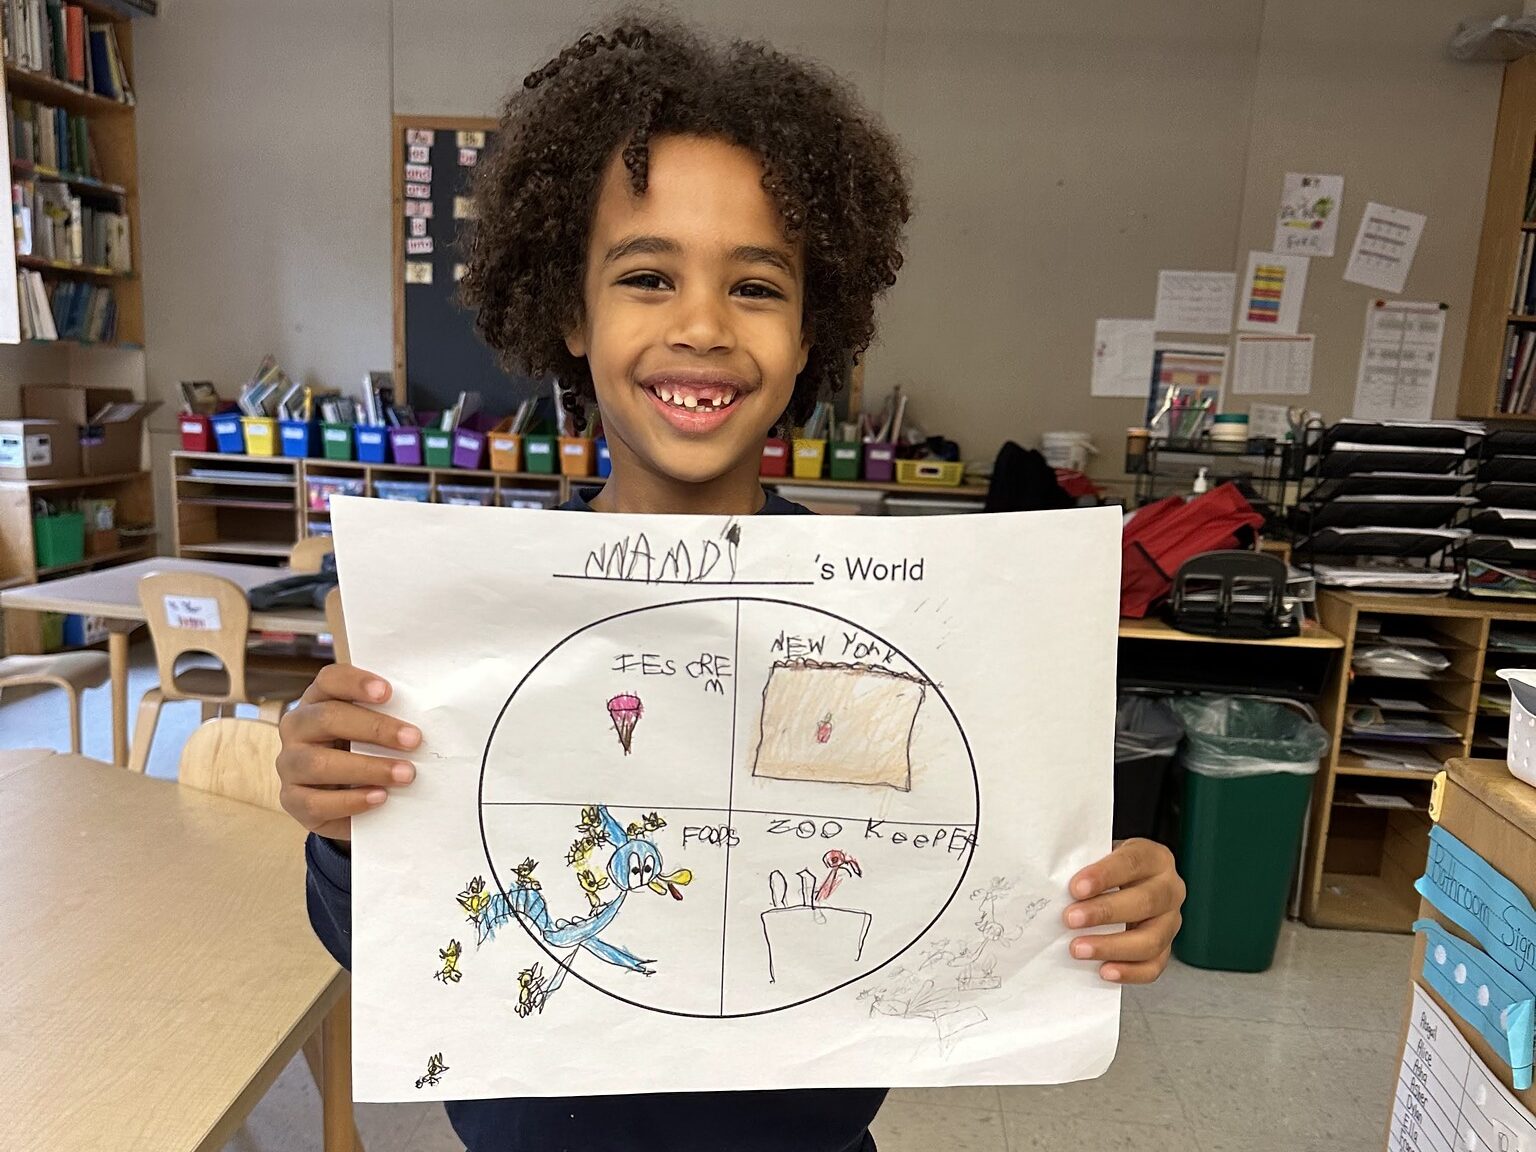 Fieldston Lower student poses with "My World" project.